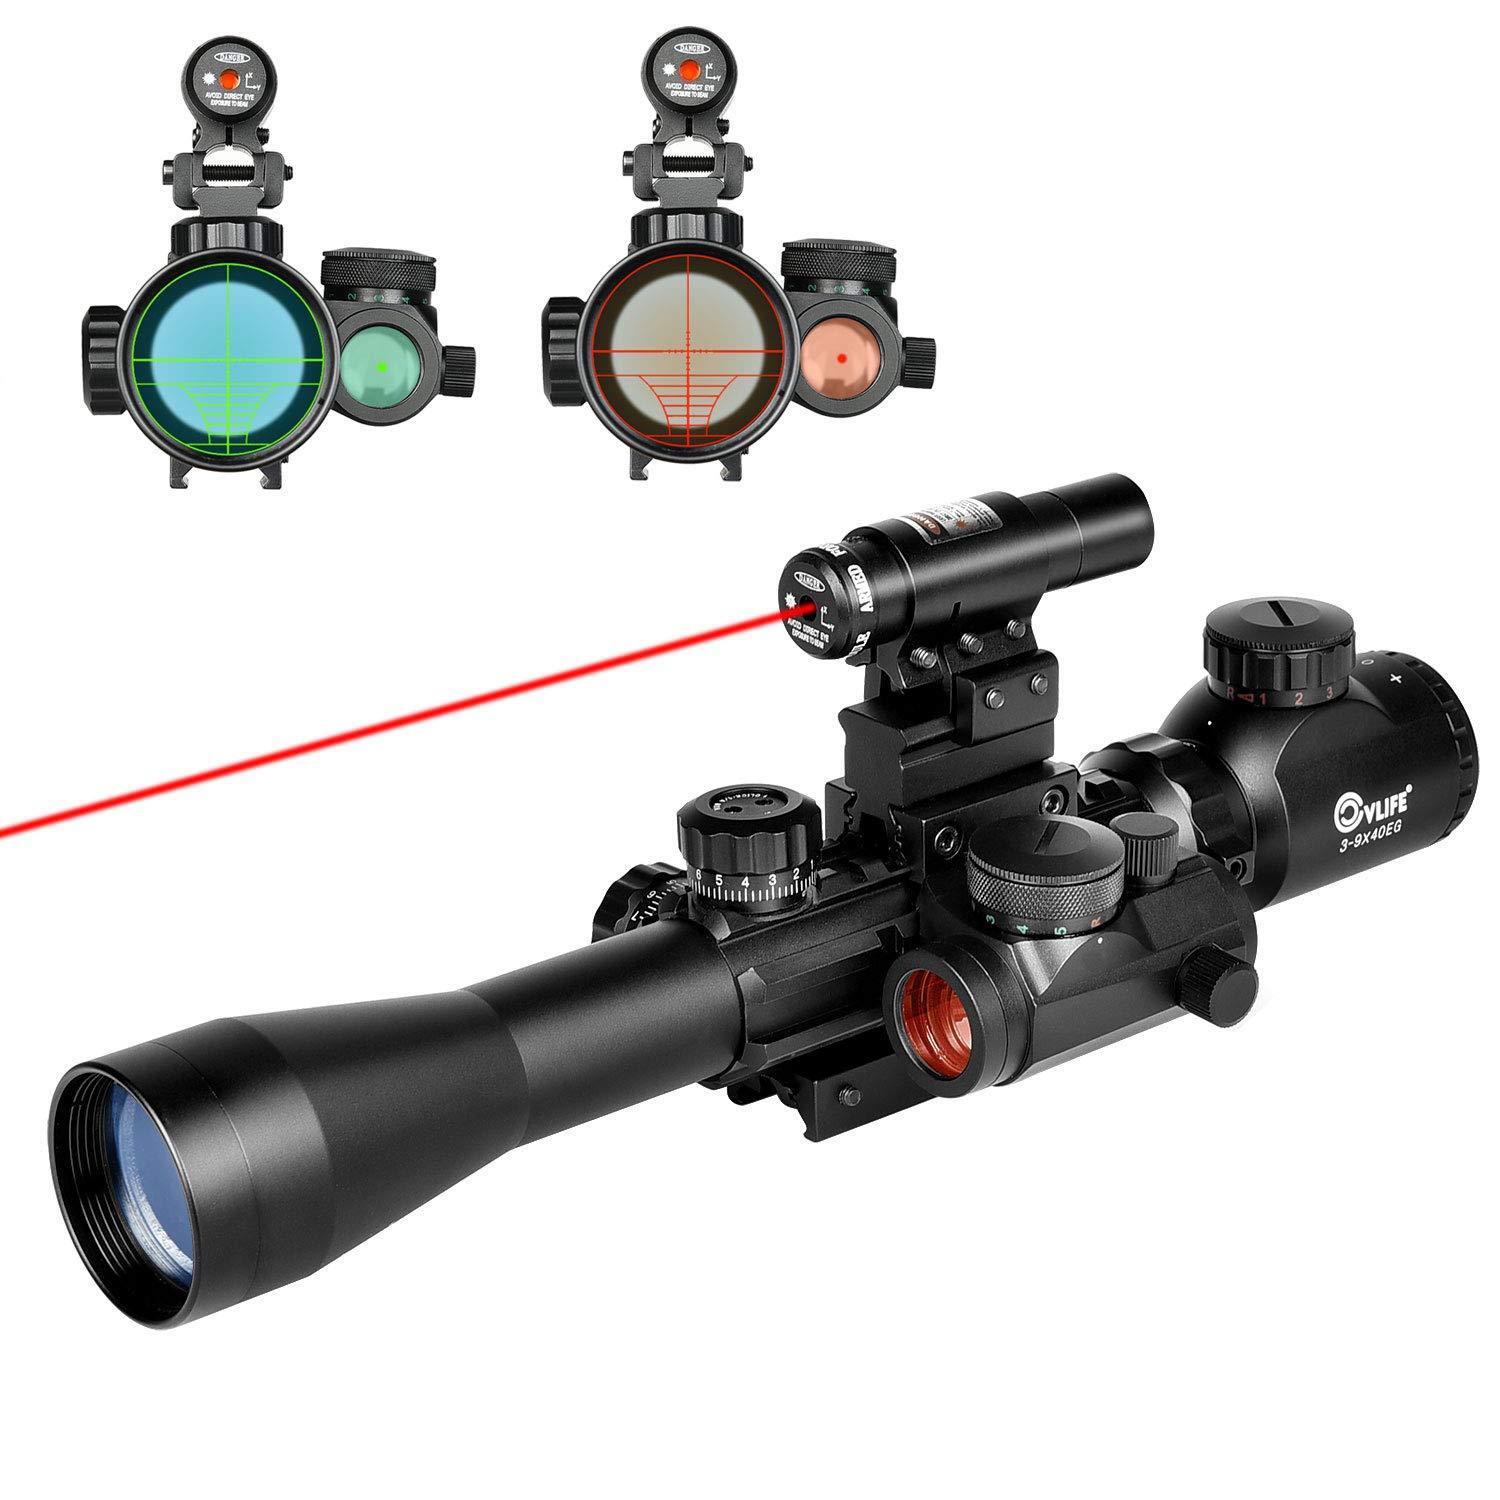 3-9X40 Illuminated Tactical Scope with Red Laser & Holographic Dot Sight CVLIFE Does Not Apply